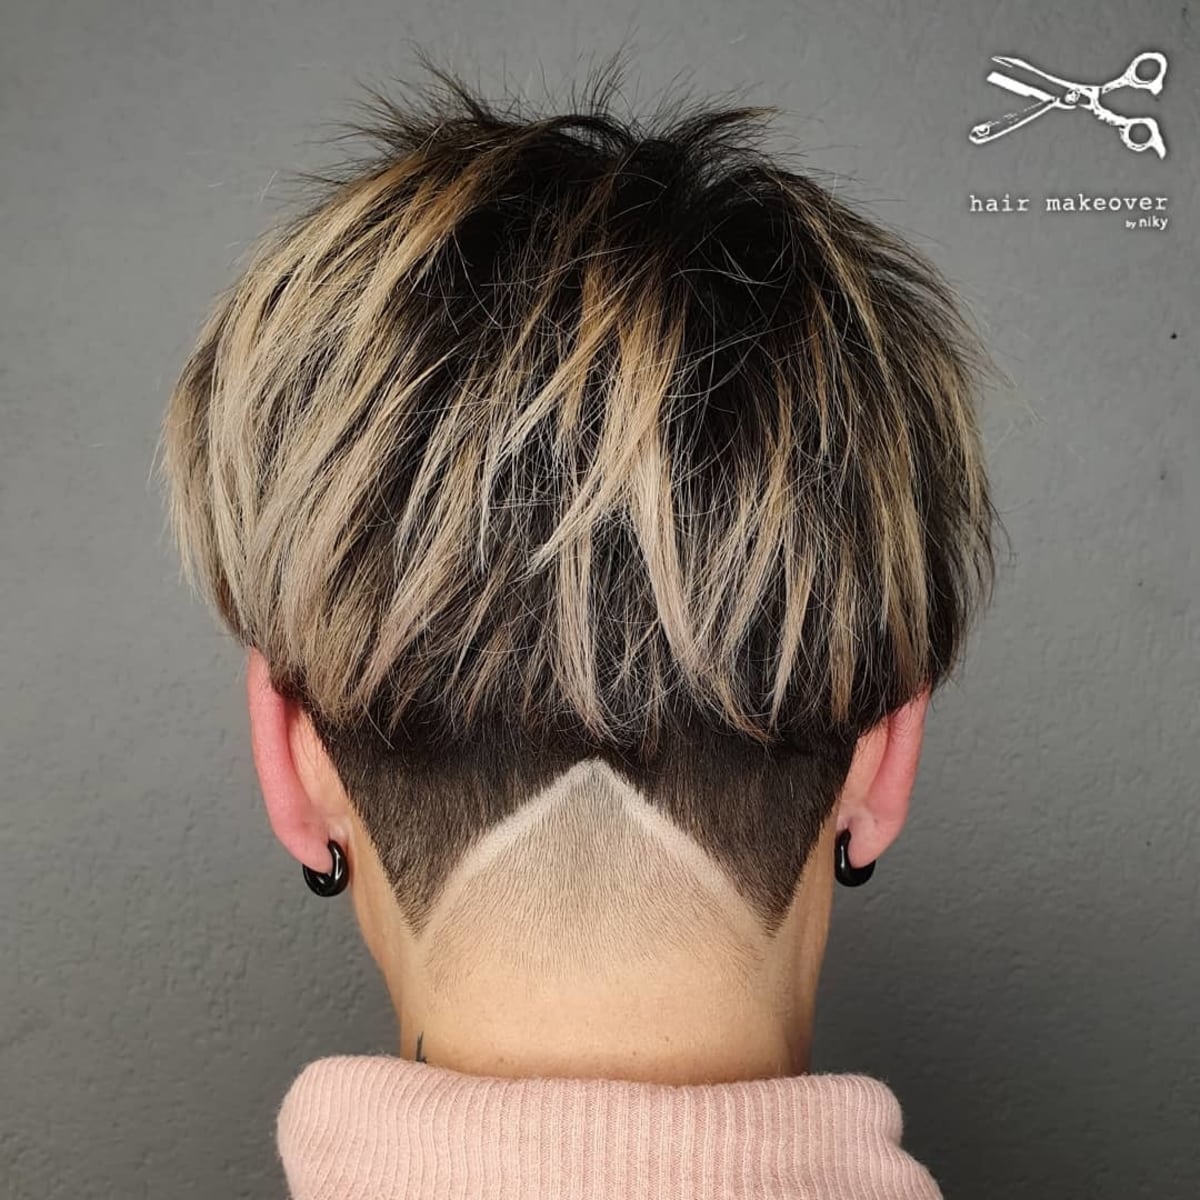 22 Coolest Undercut Hairstyles for Women Right Now